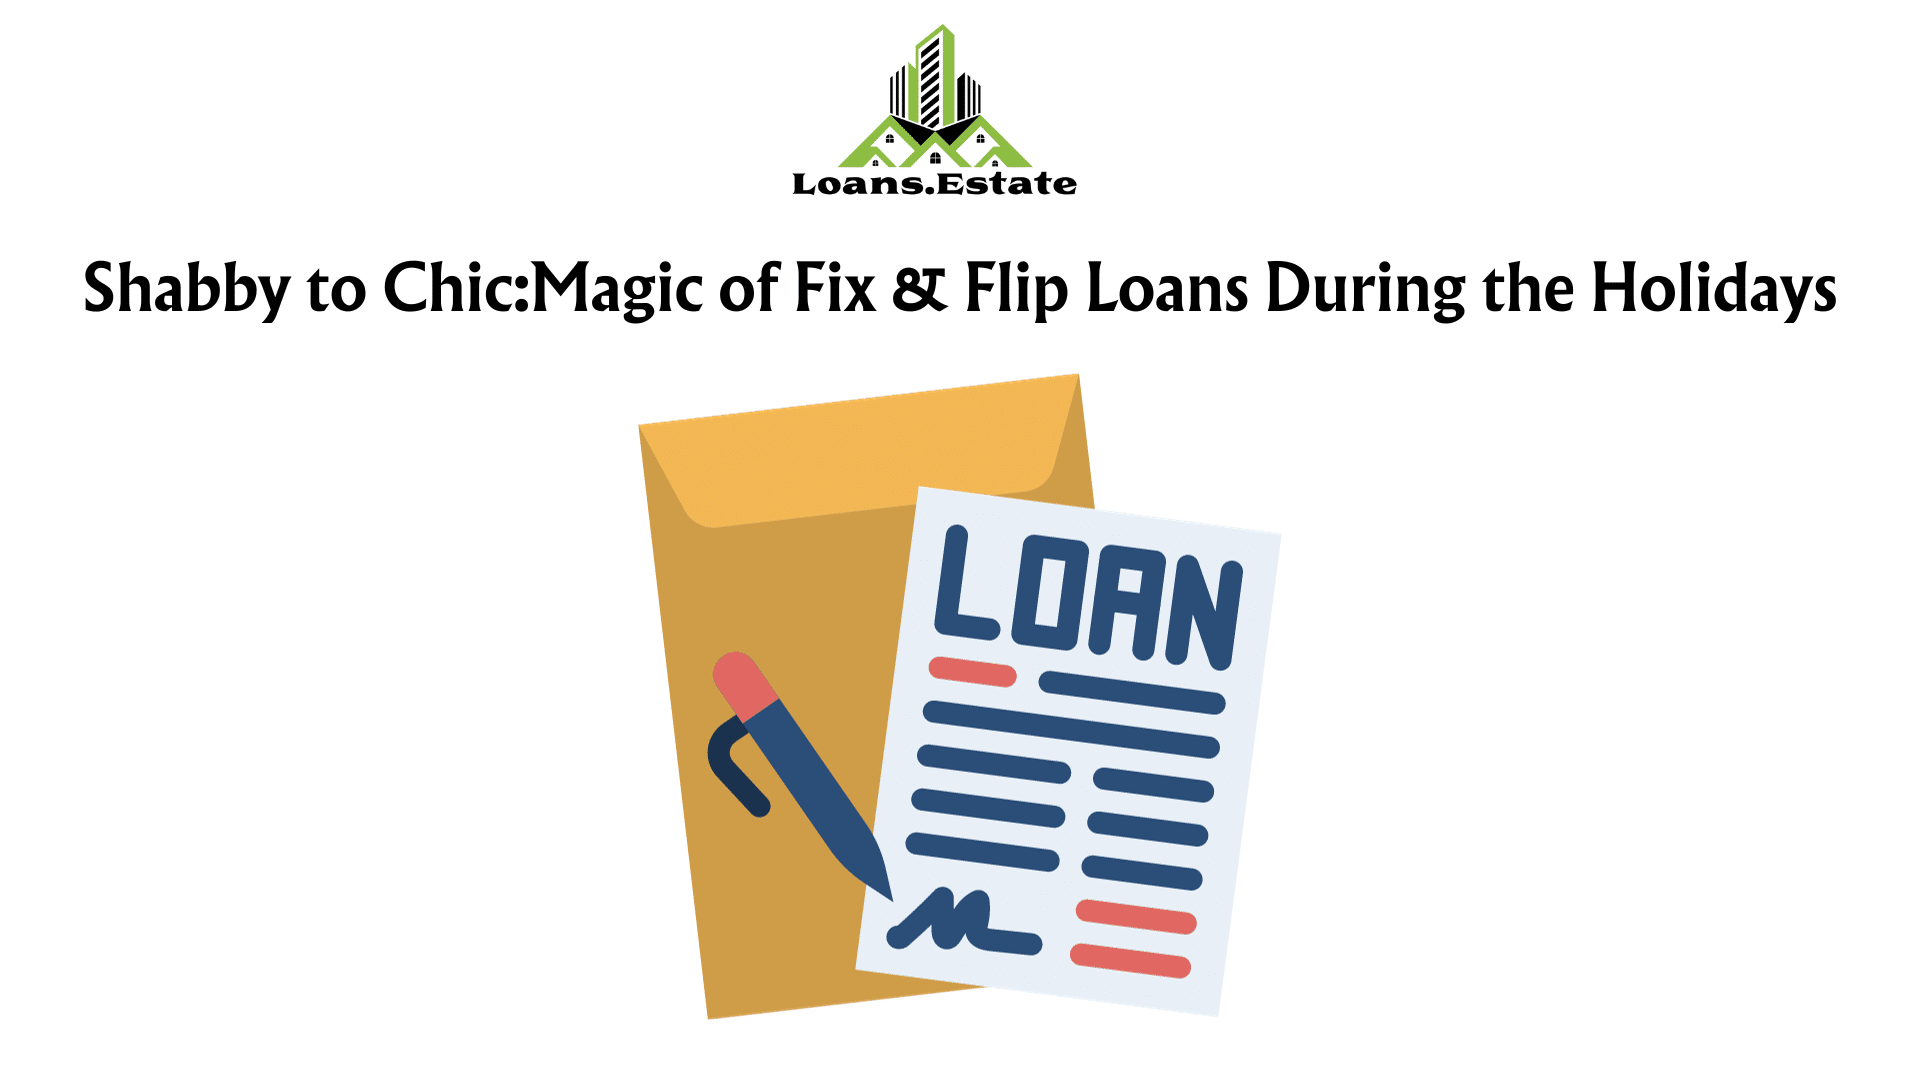 Shabby to Chic: Magic of Fix & Flip Loans During the Holidays